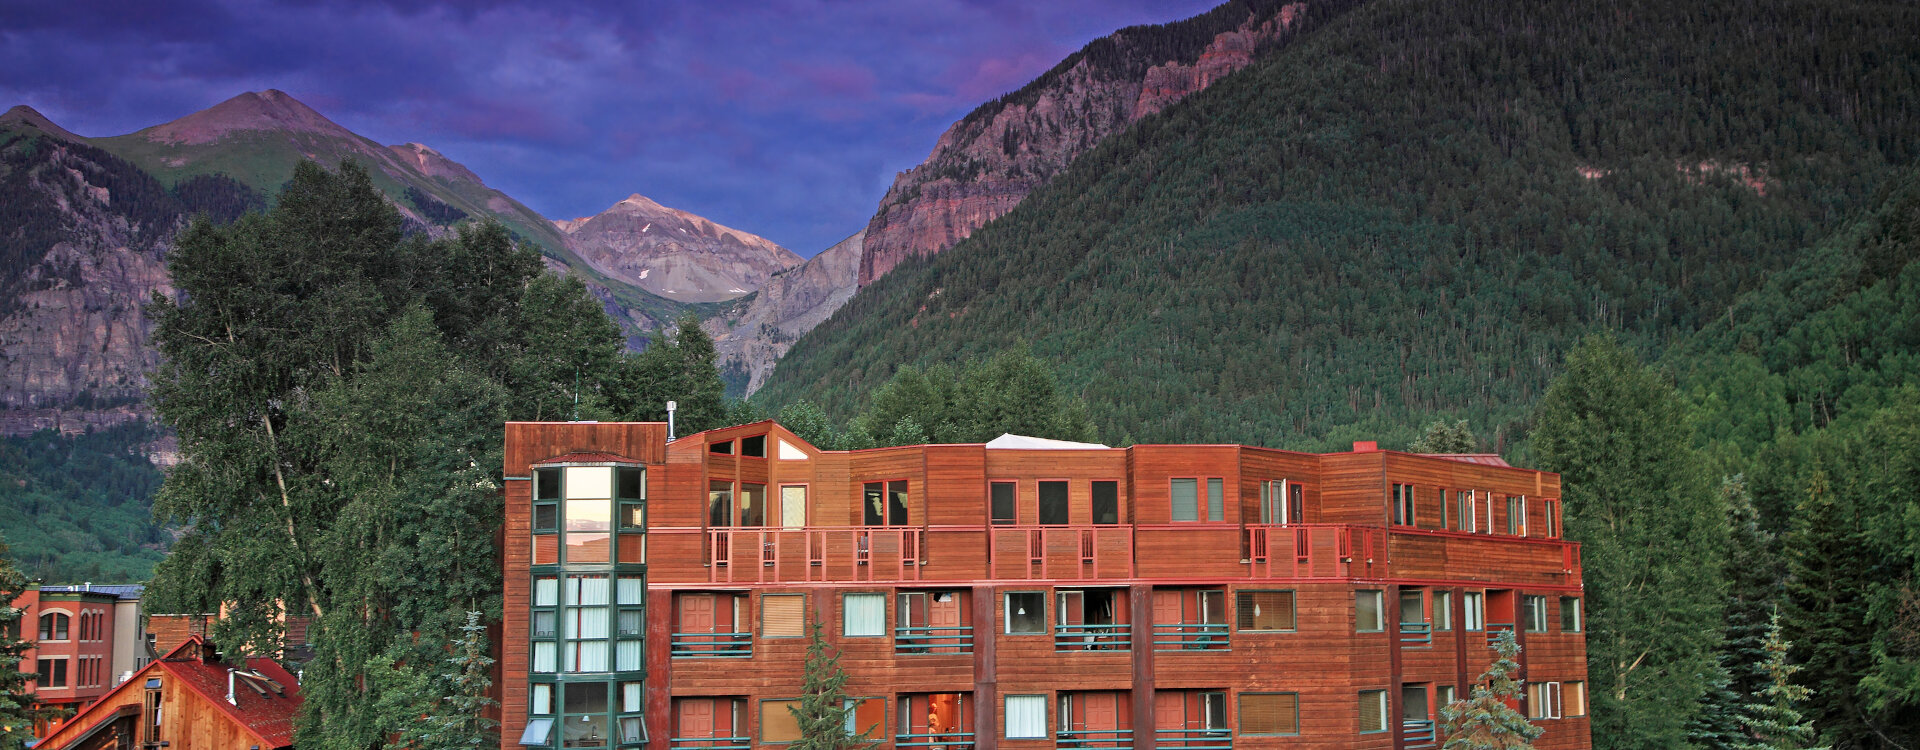 6.02-Telluride-Vacation-Rental-Ice-House-305-Exterior